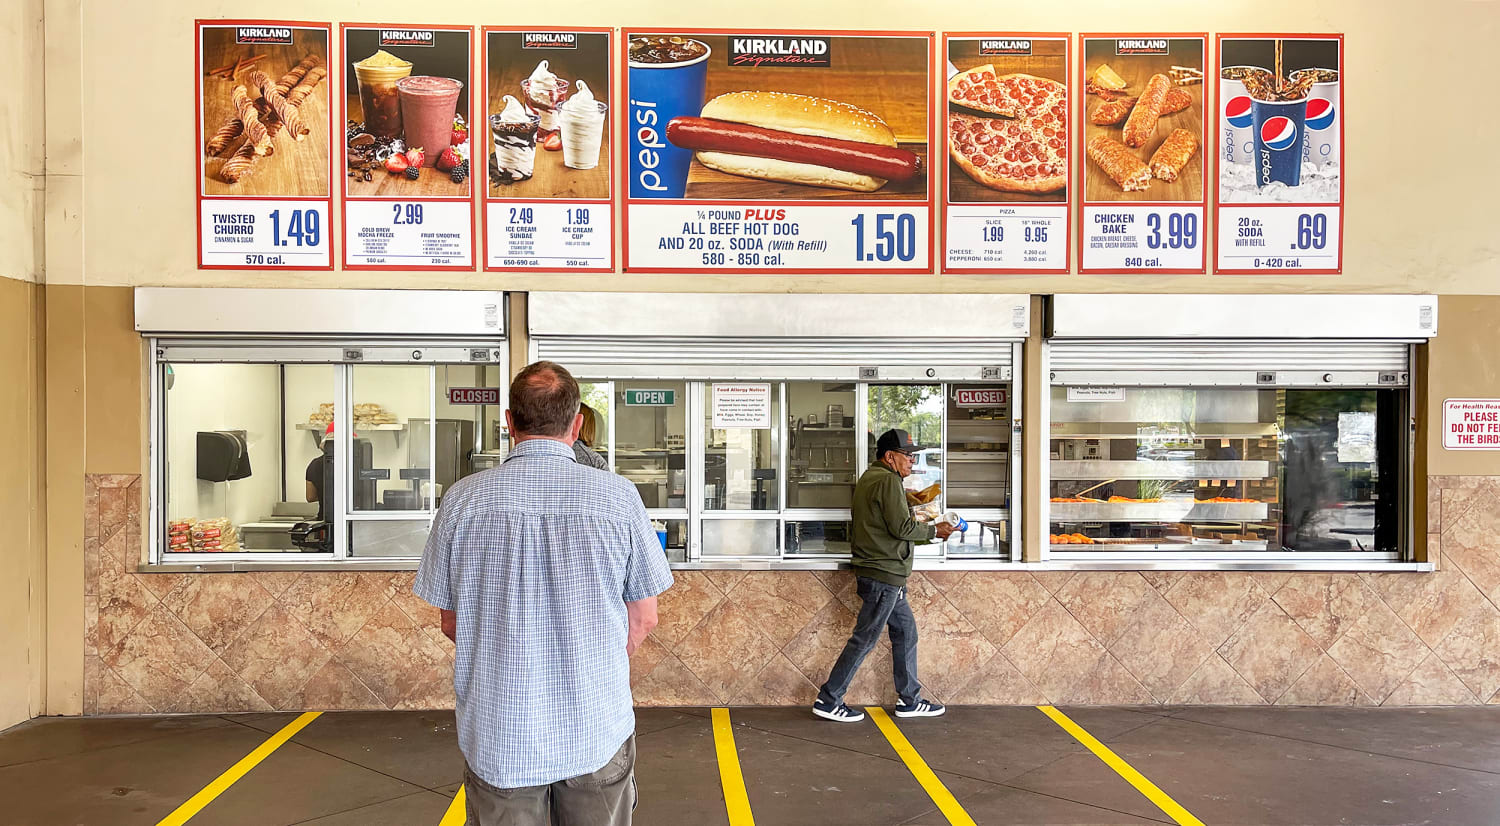 Non-members may no longer be able to get Costco's iconic $1.50 hot dog combo